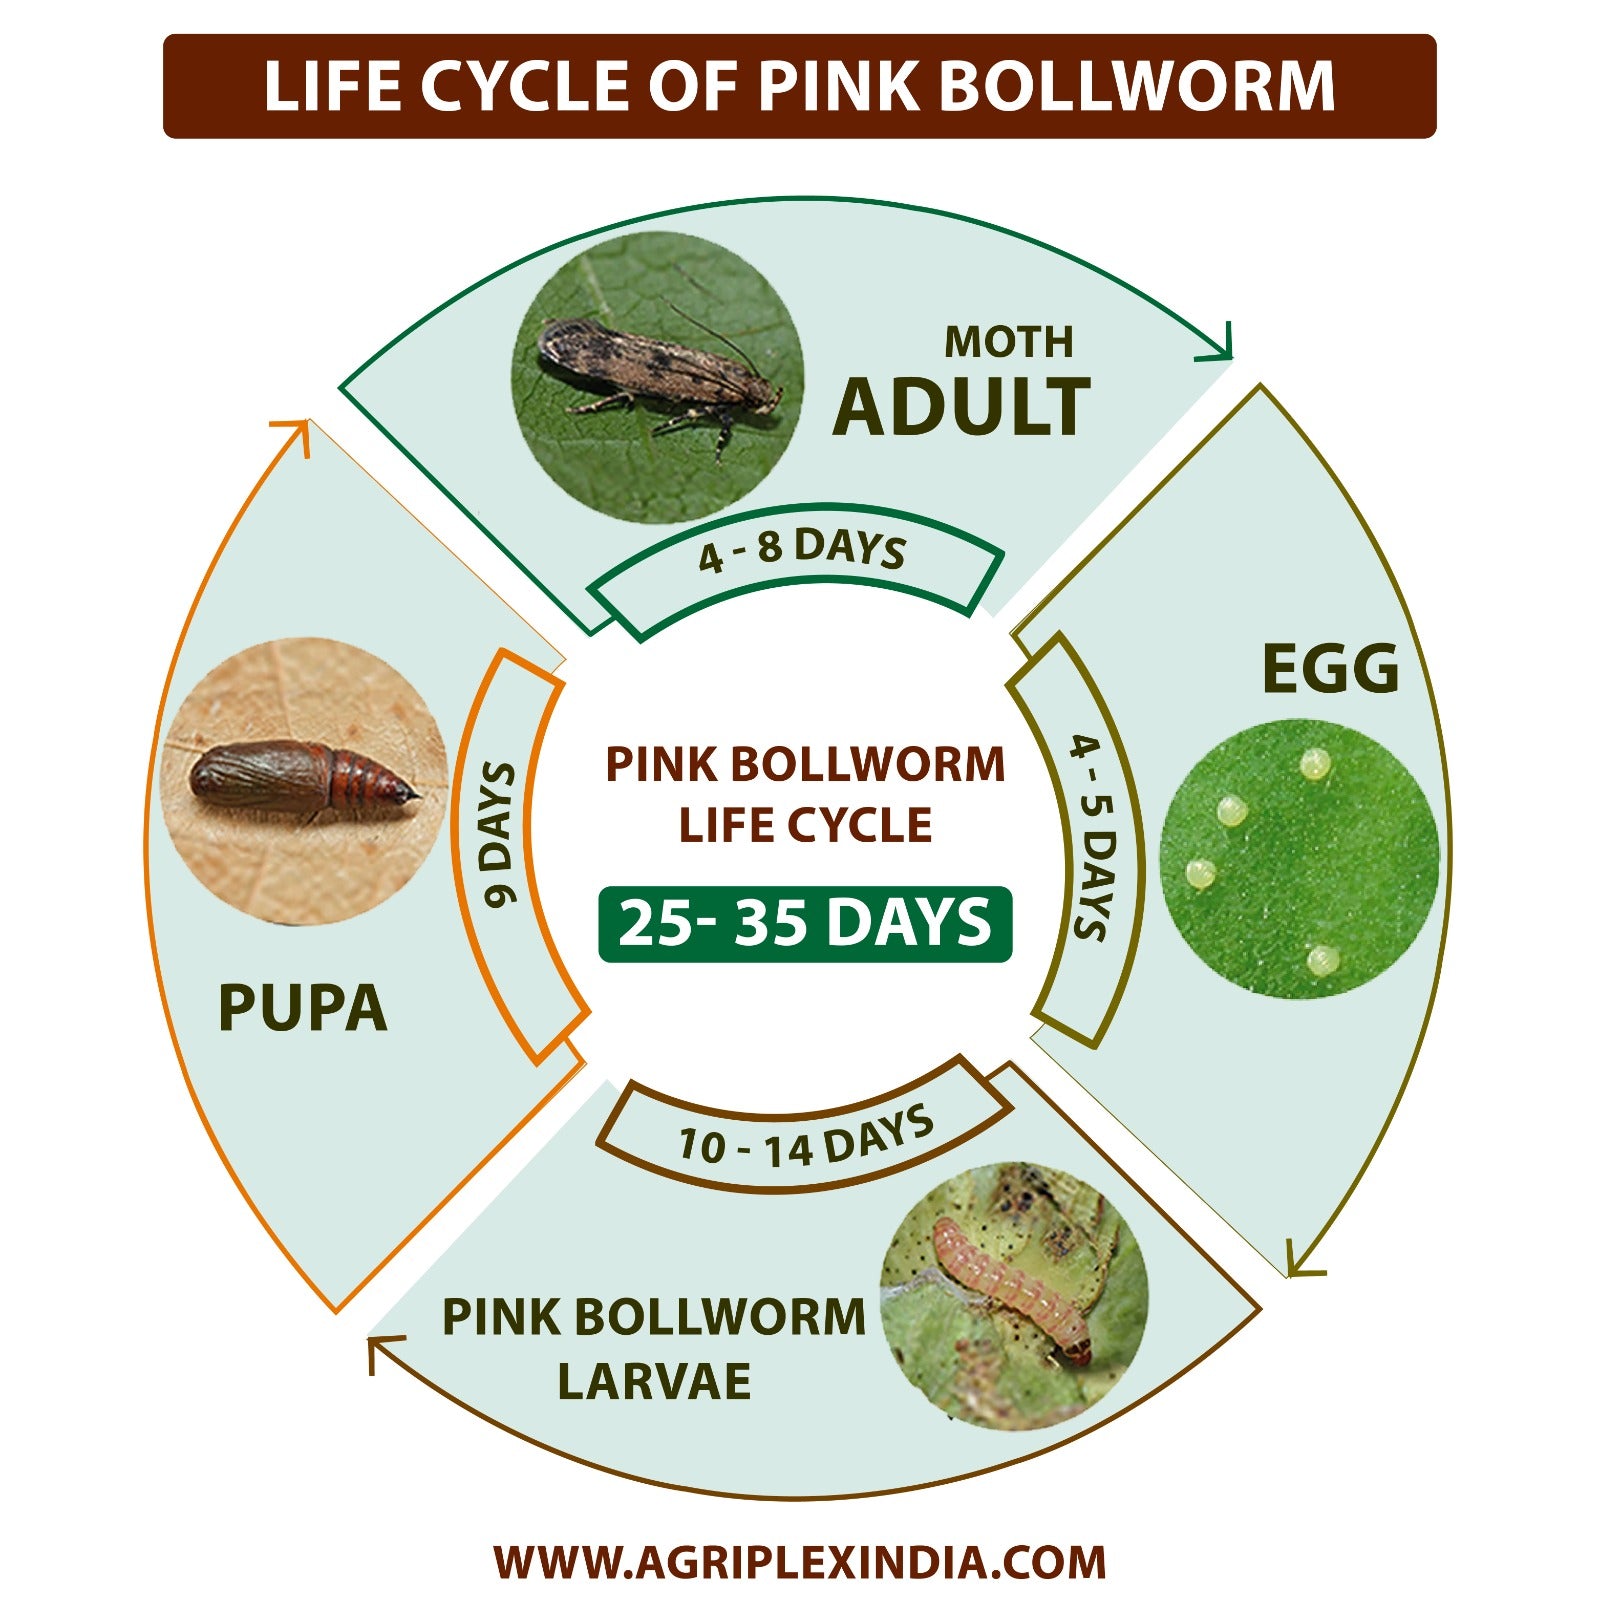 Life Cycle of Pink Bollworm